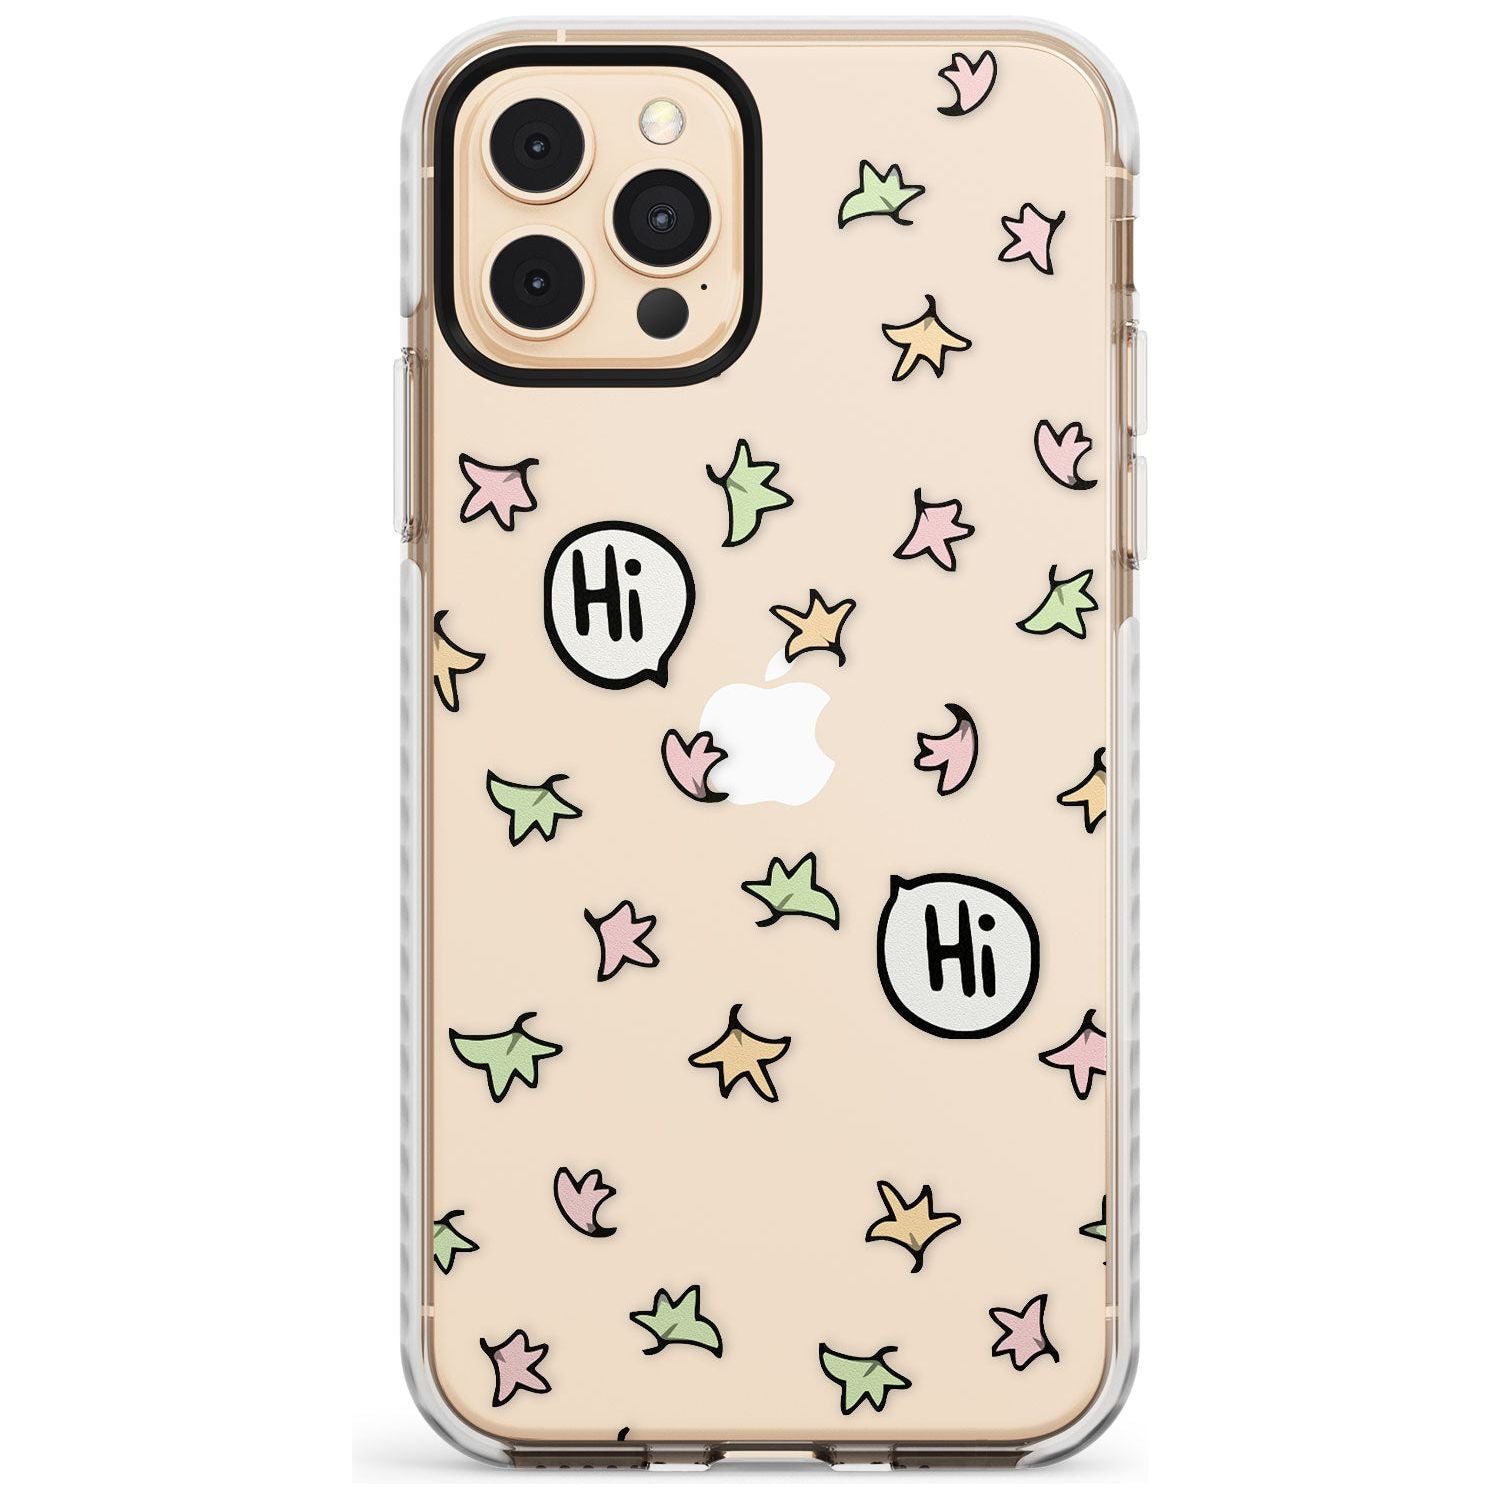 Heartstopper Leaves Pattern Impact Phone Case for iPhone 11 Pro Max